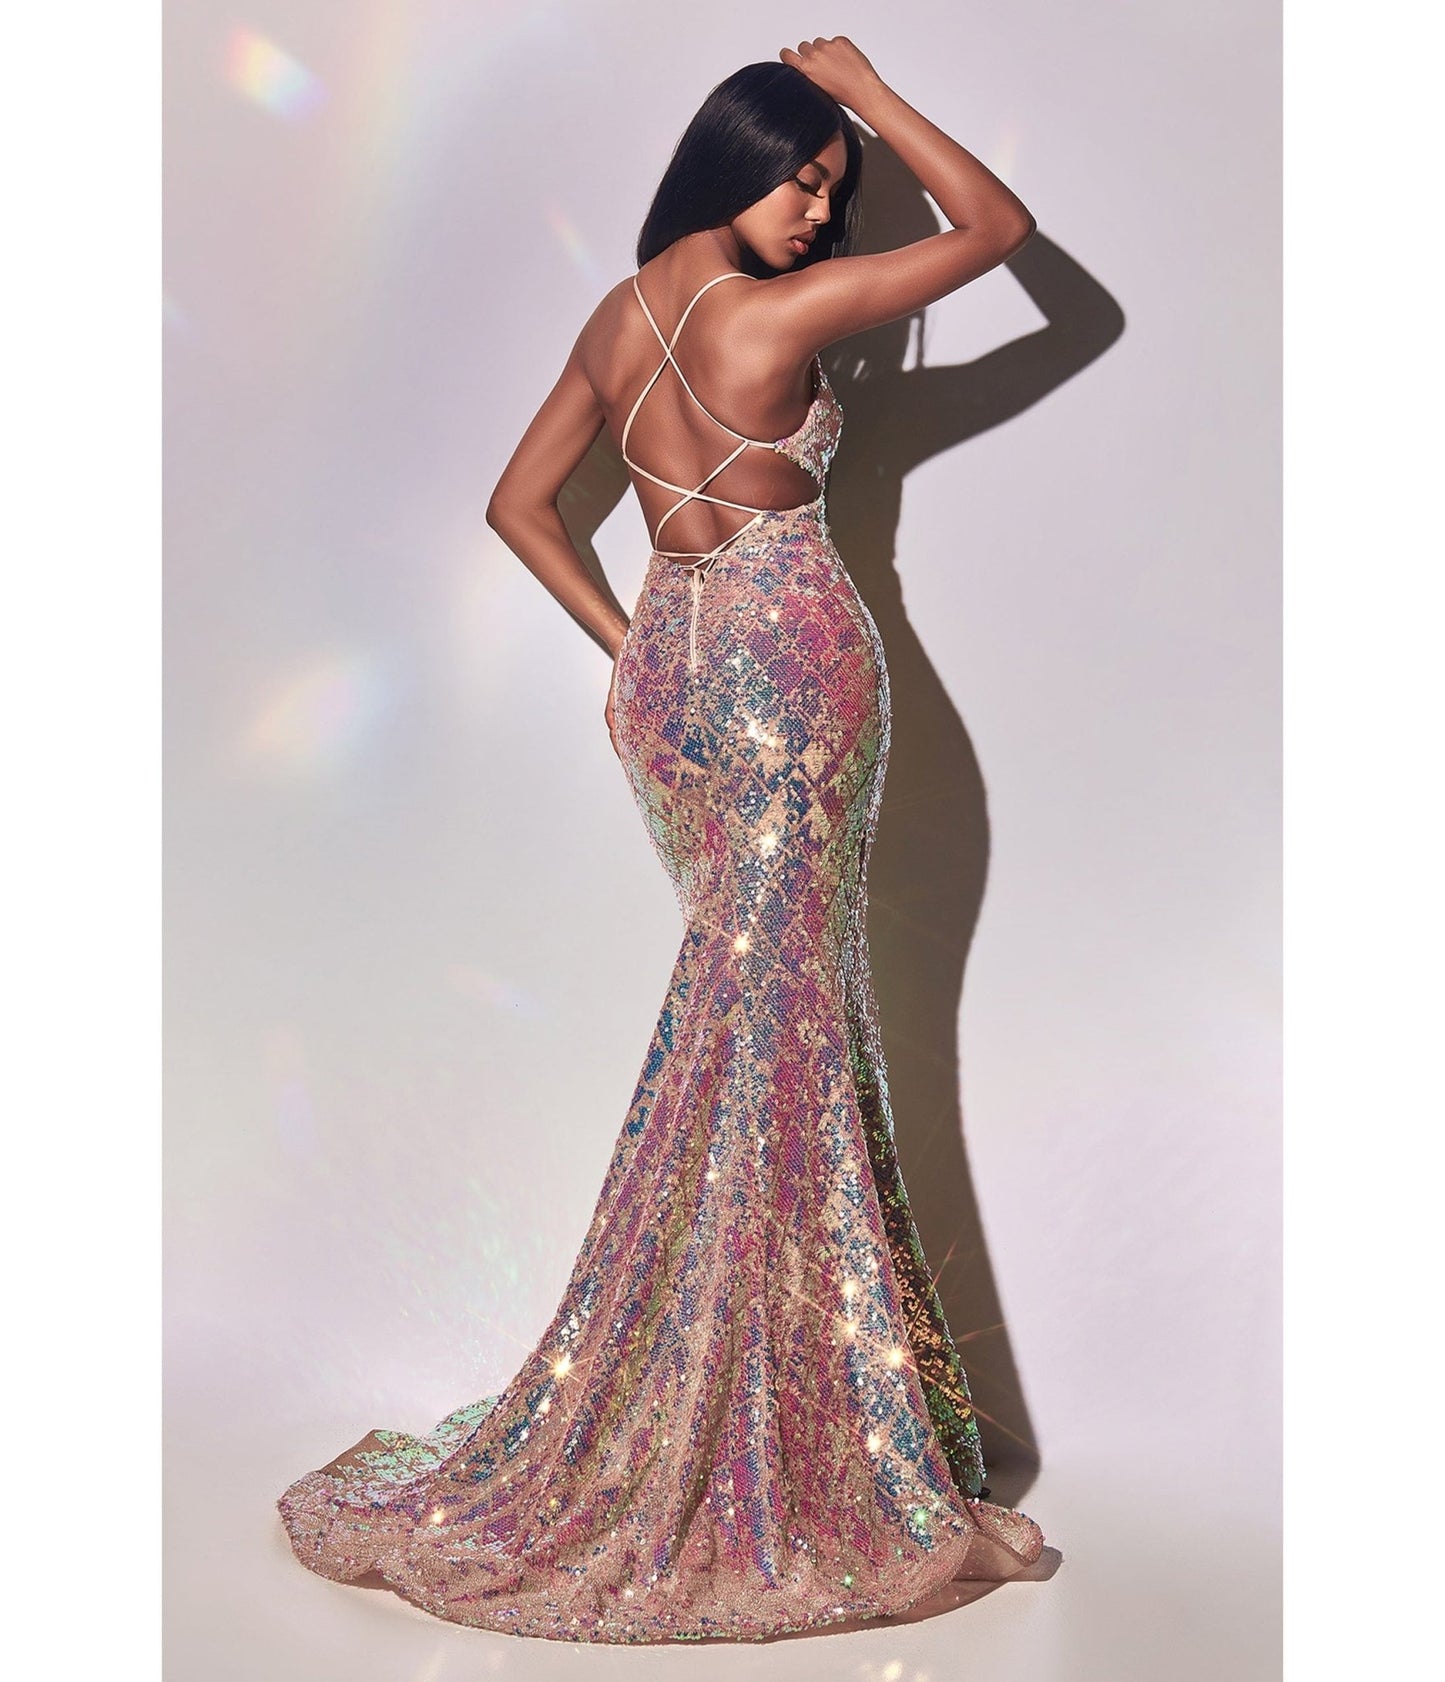 Magical Mermaid Iridescent Sequin Prom Gown - Unique Vintage - Womens, DRESSES, PROM AND SPECIAL OCCASION